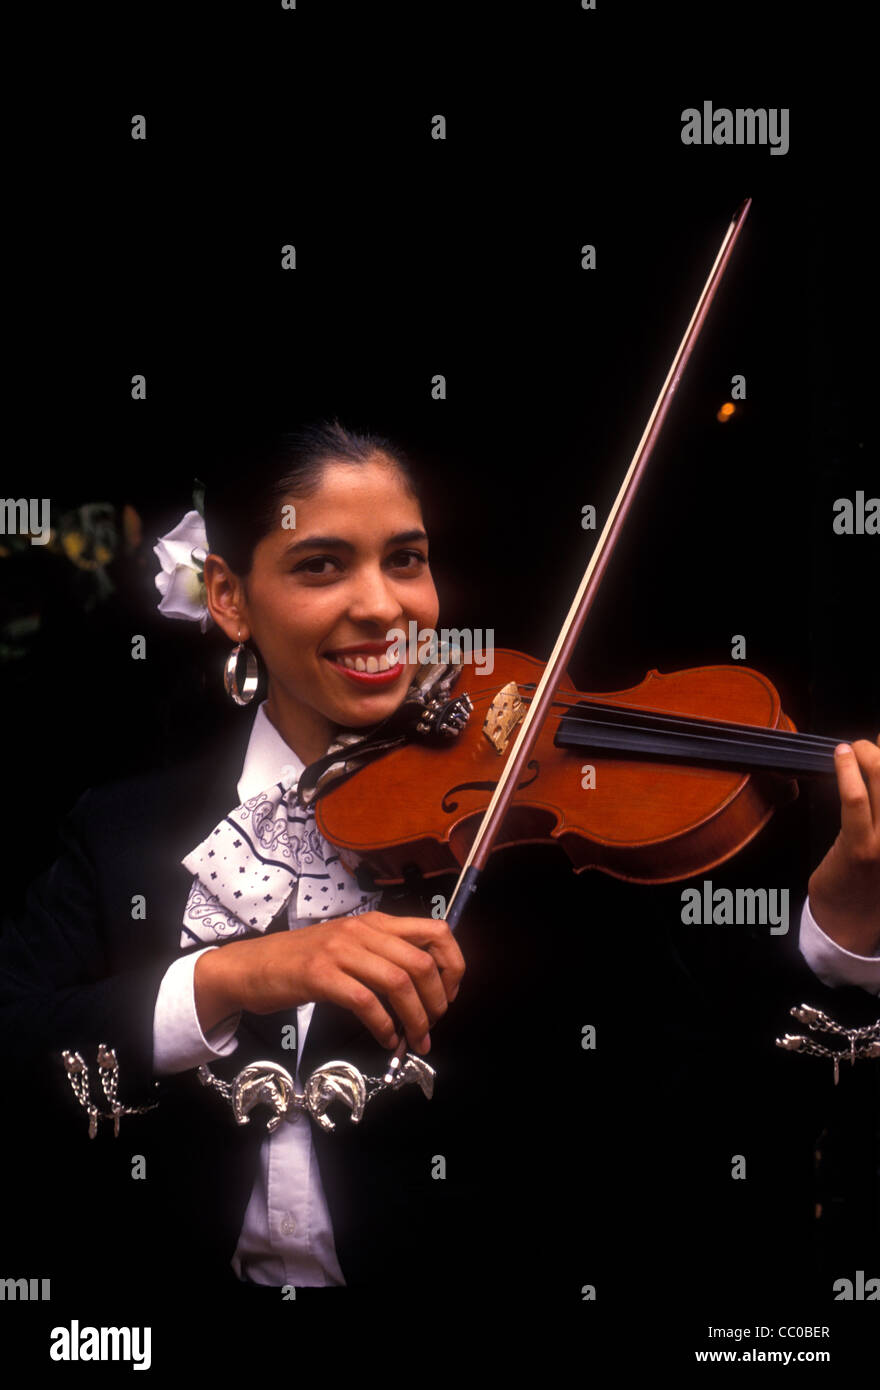 1, one, Mexican woman, Mexican, woman, violinist, playing violin, violin,  violin player, musician, mariachi band, Tlaquepaque, Jalisco State, Mexico  Stock Photo - Alamy